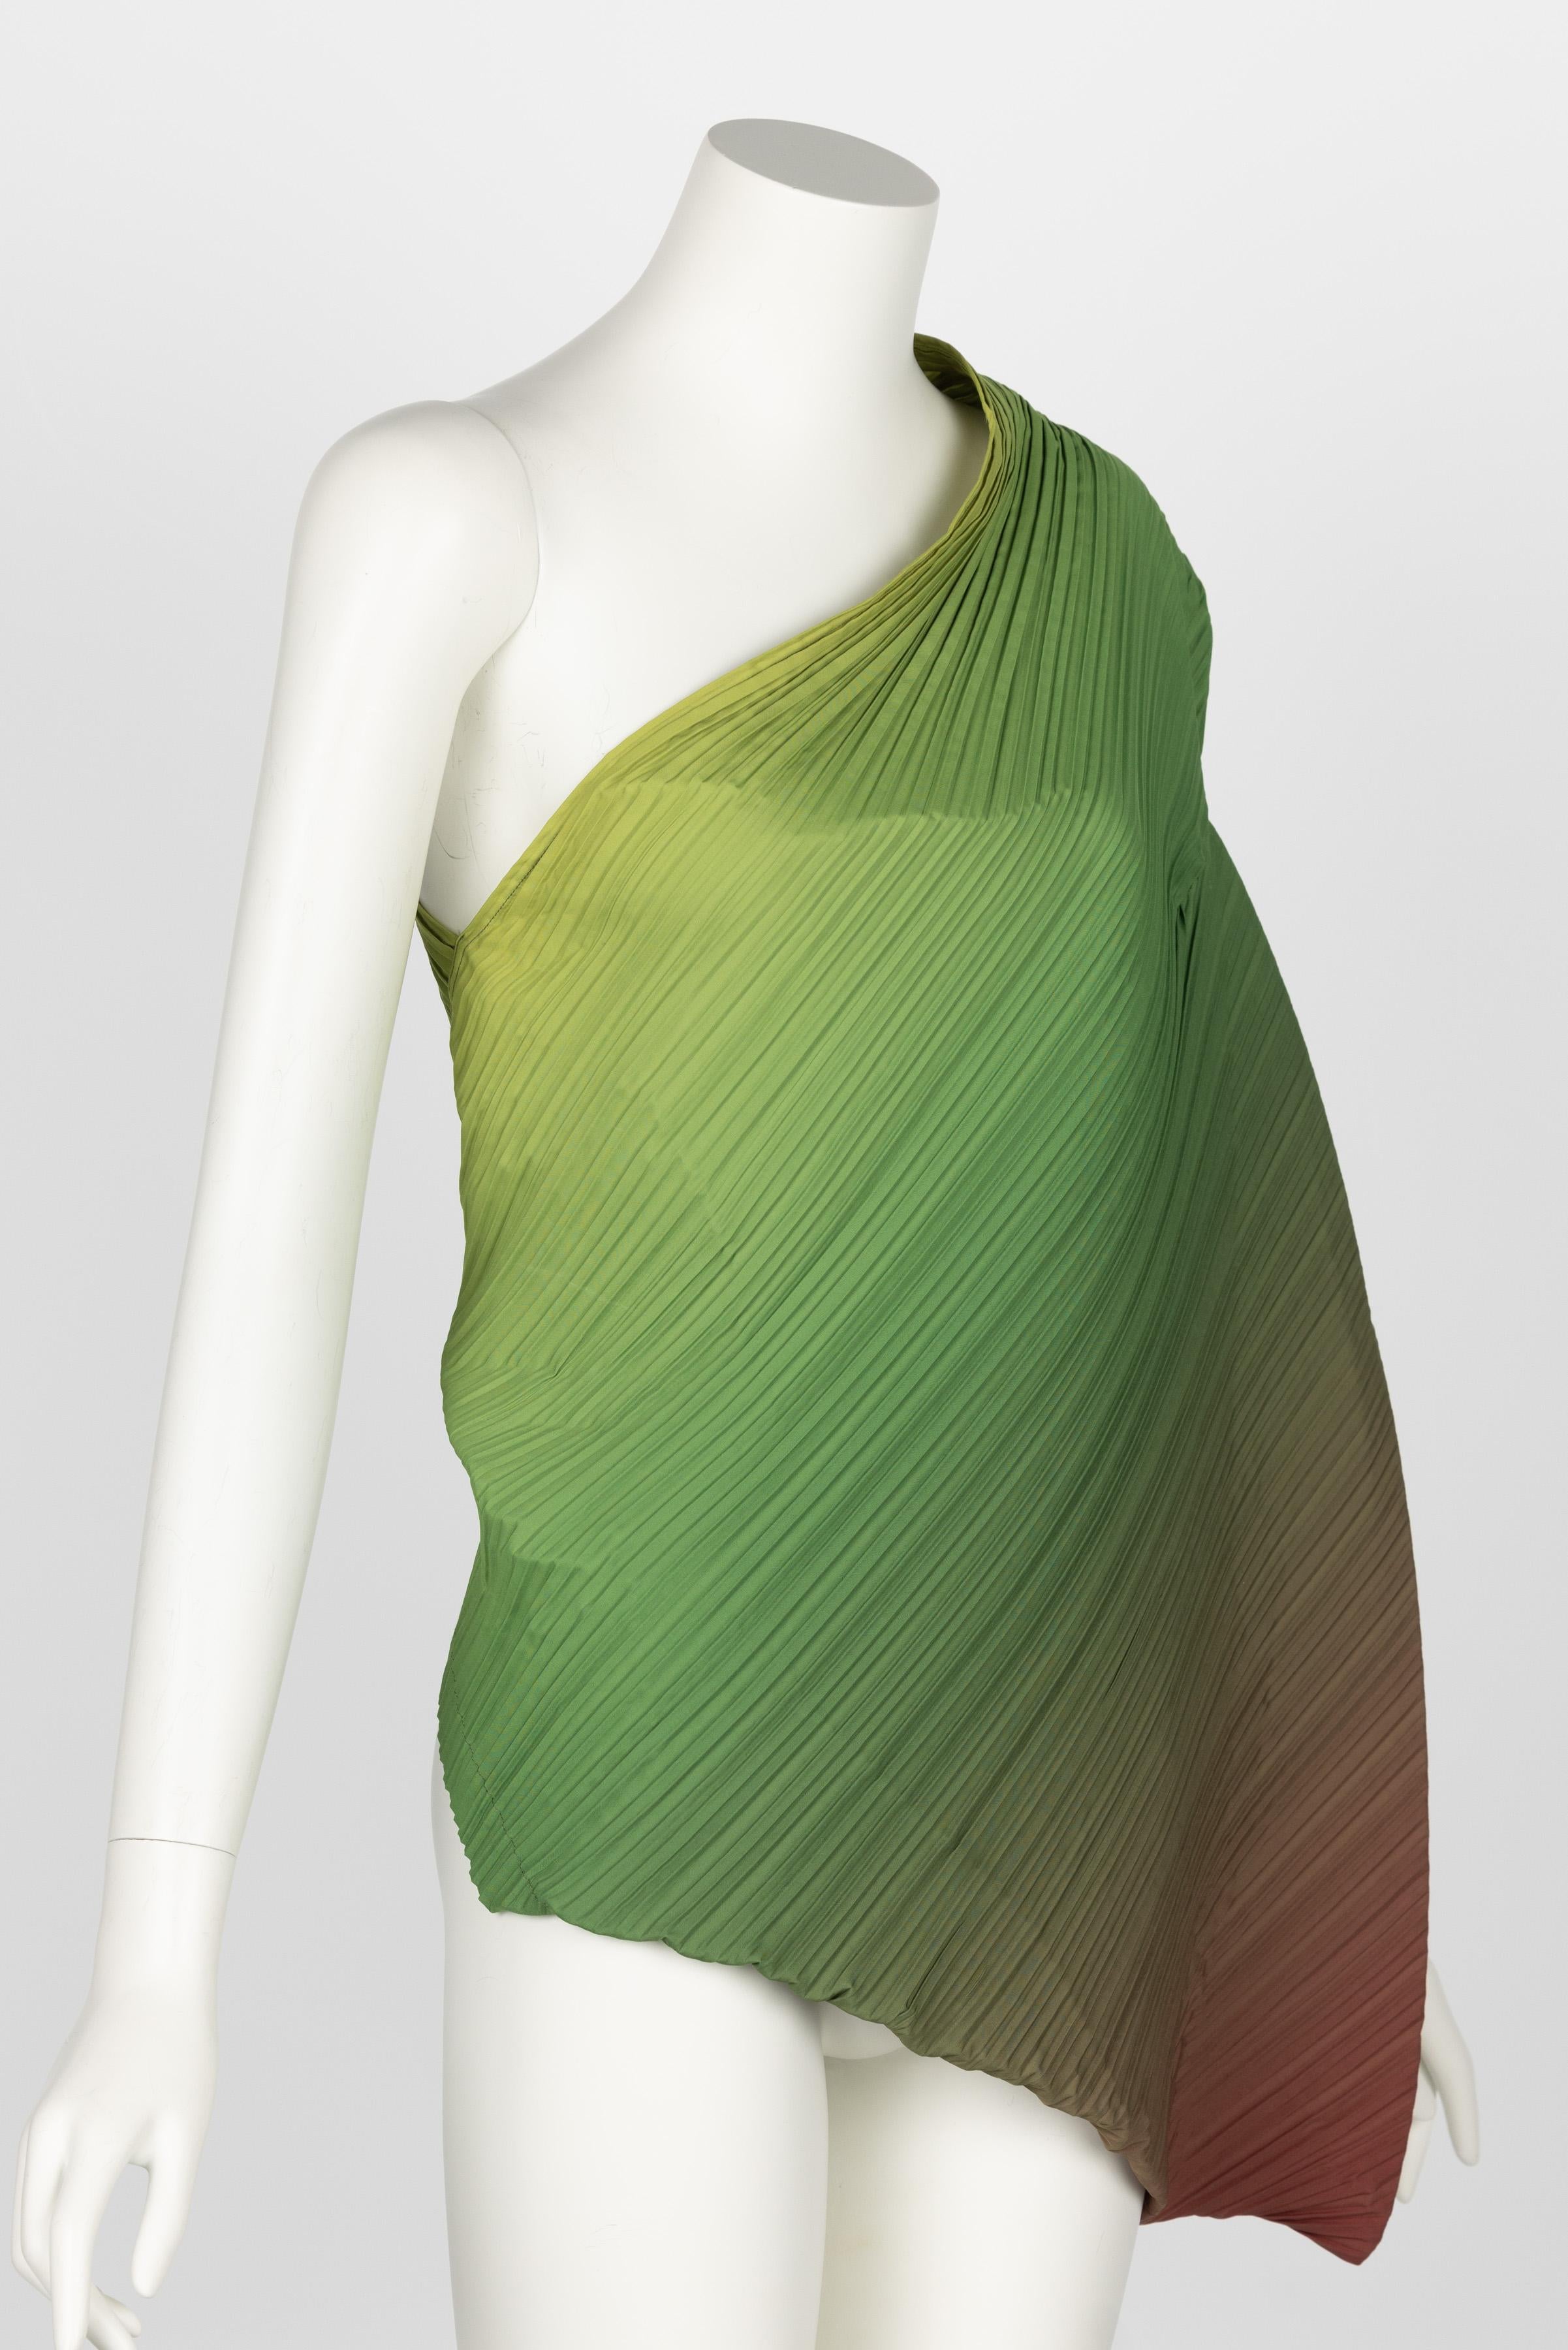 Early Issey Miyake 1989 Collection Ombre One Shoulder Top 1